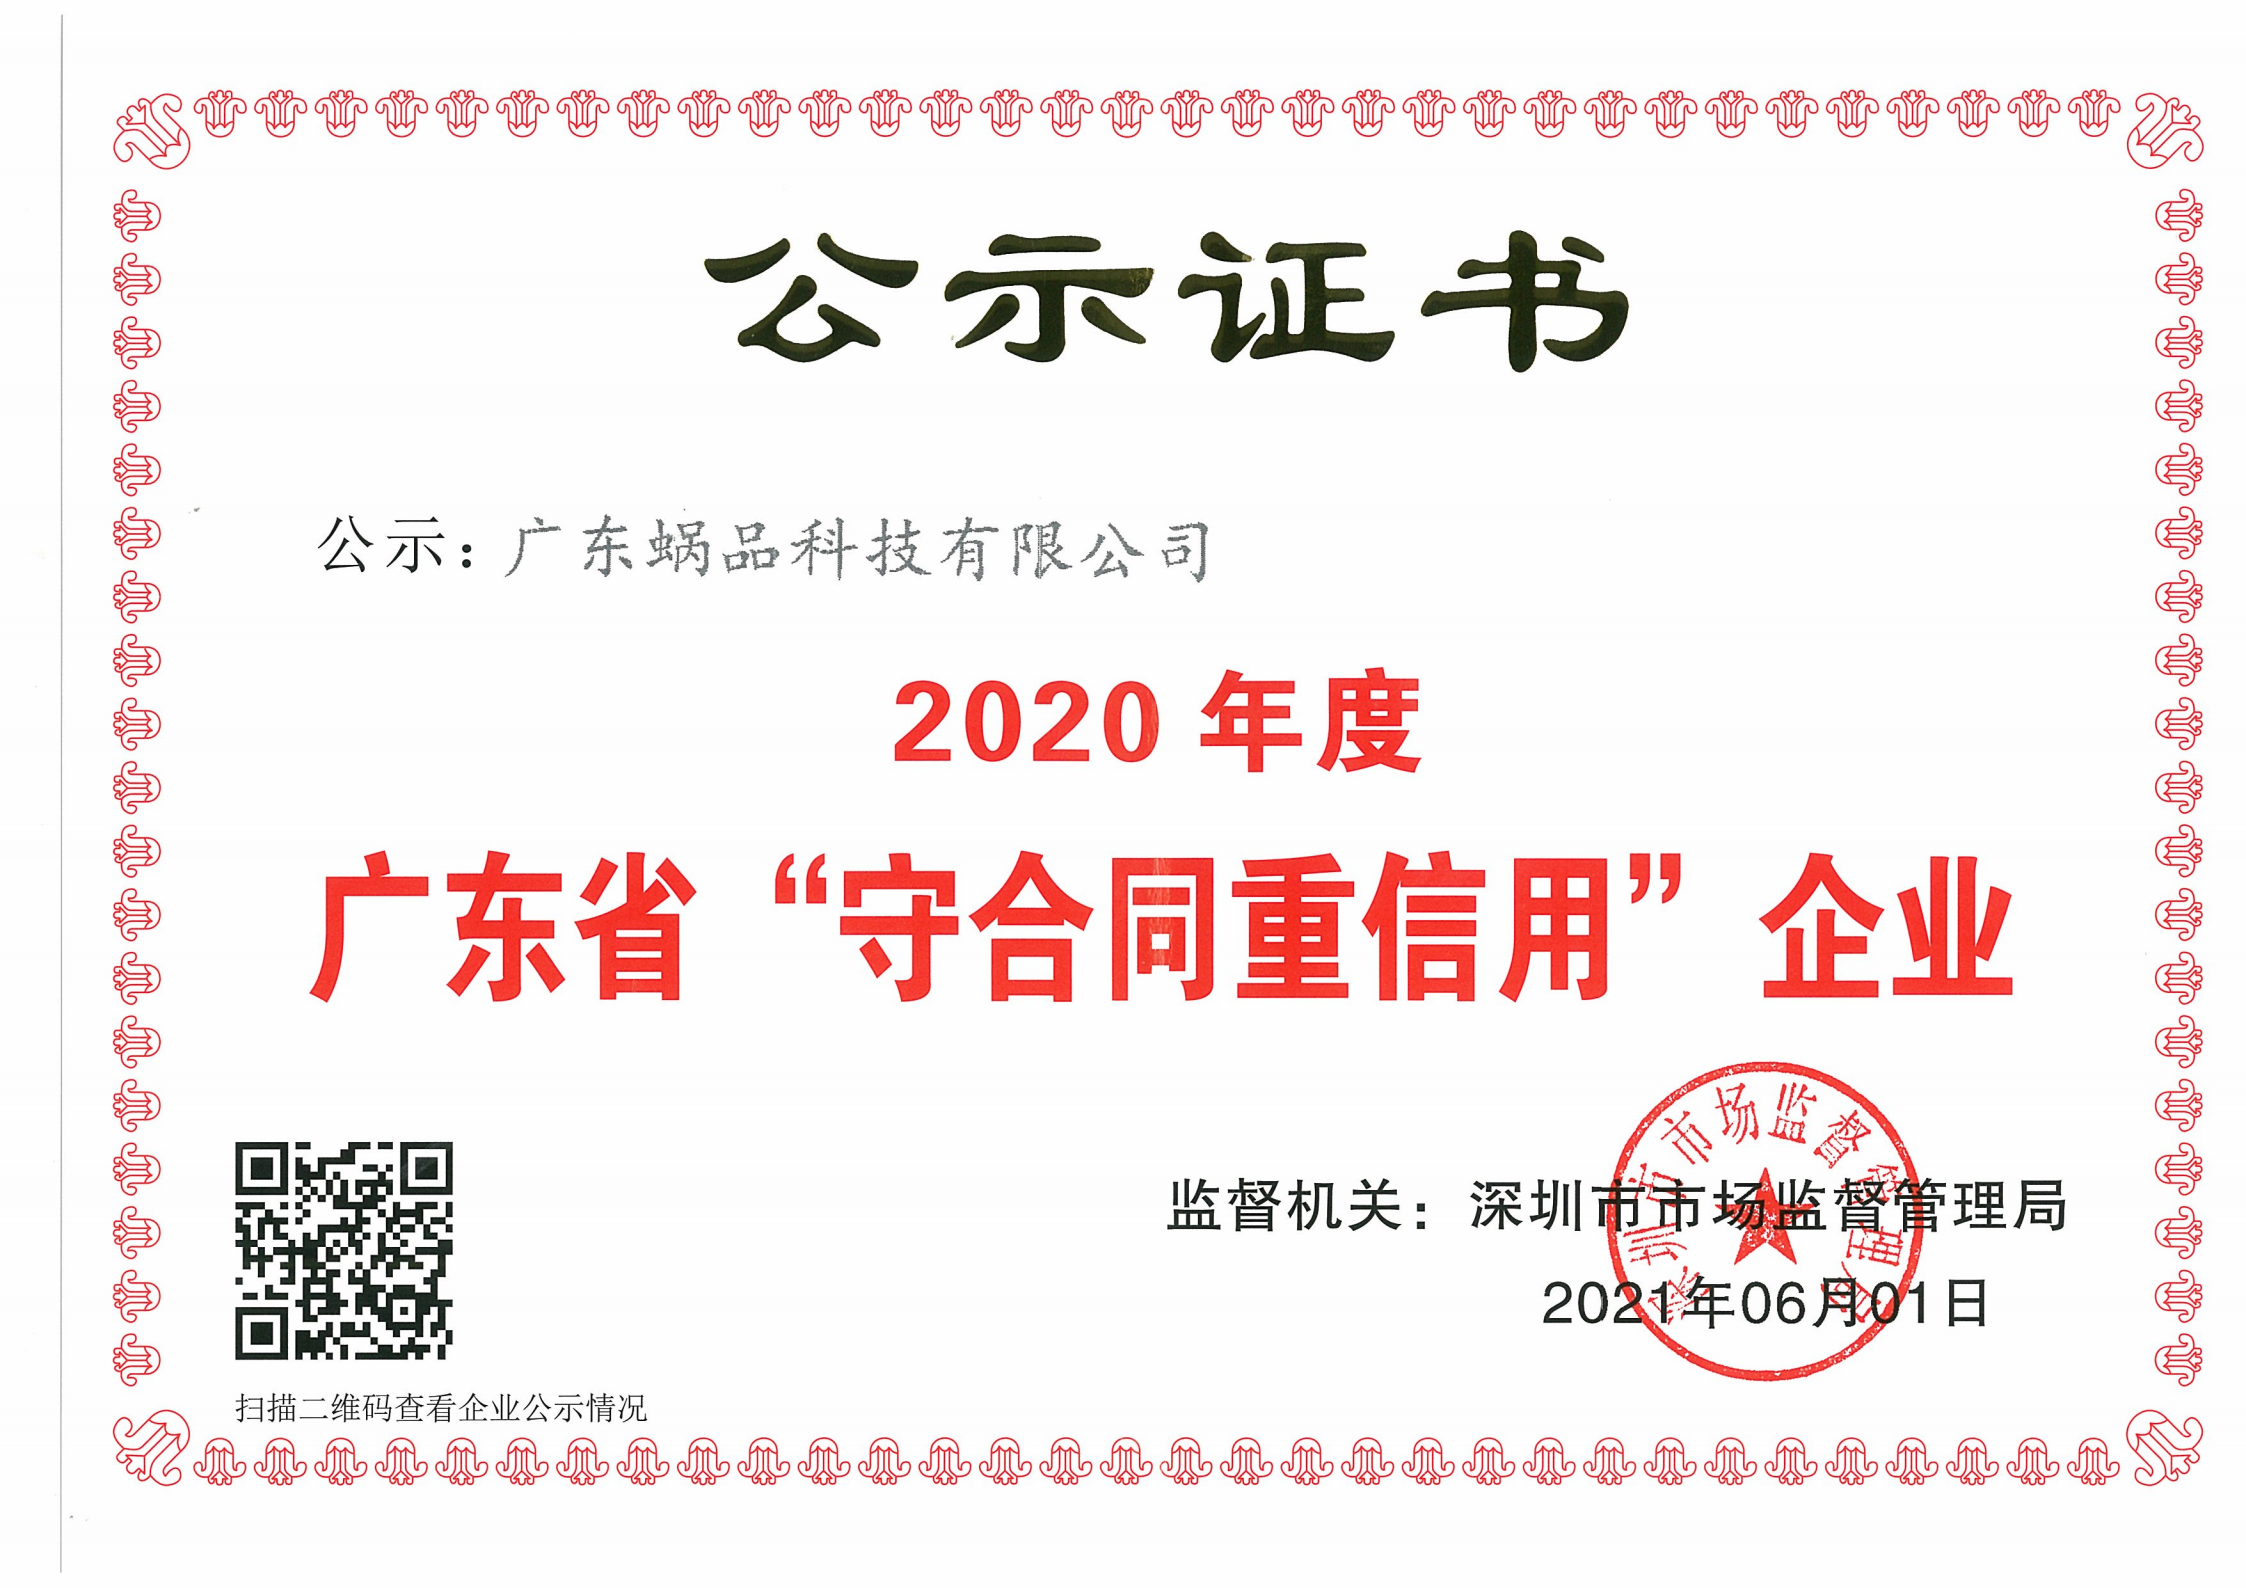 Wopin Technology won the honorary certificate of Guangdong Province 